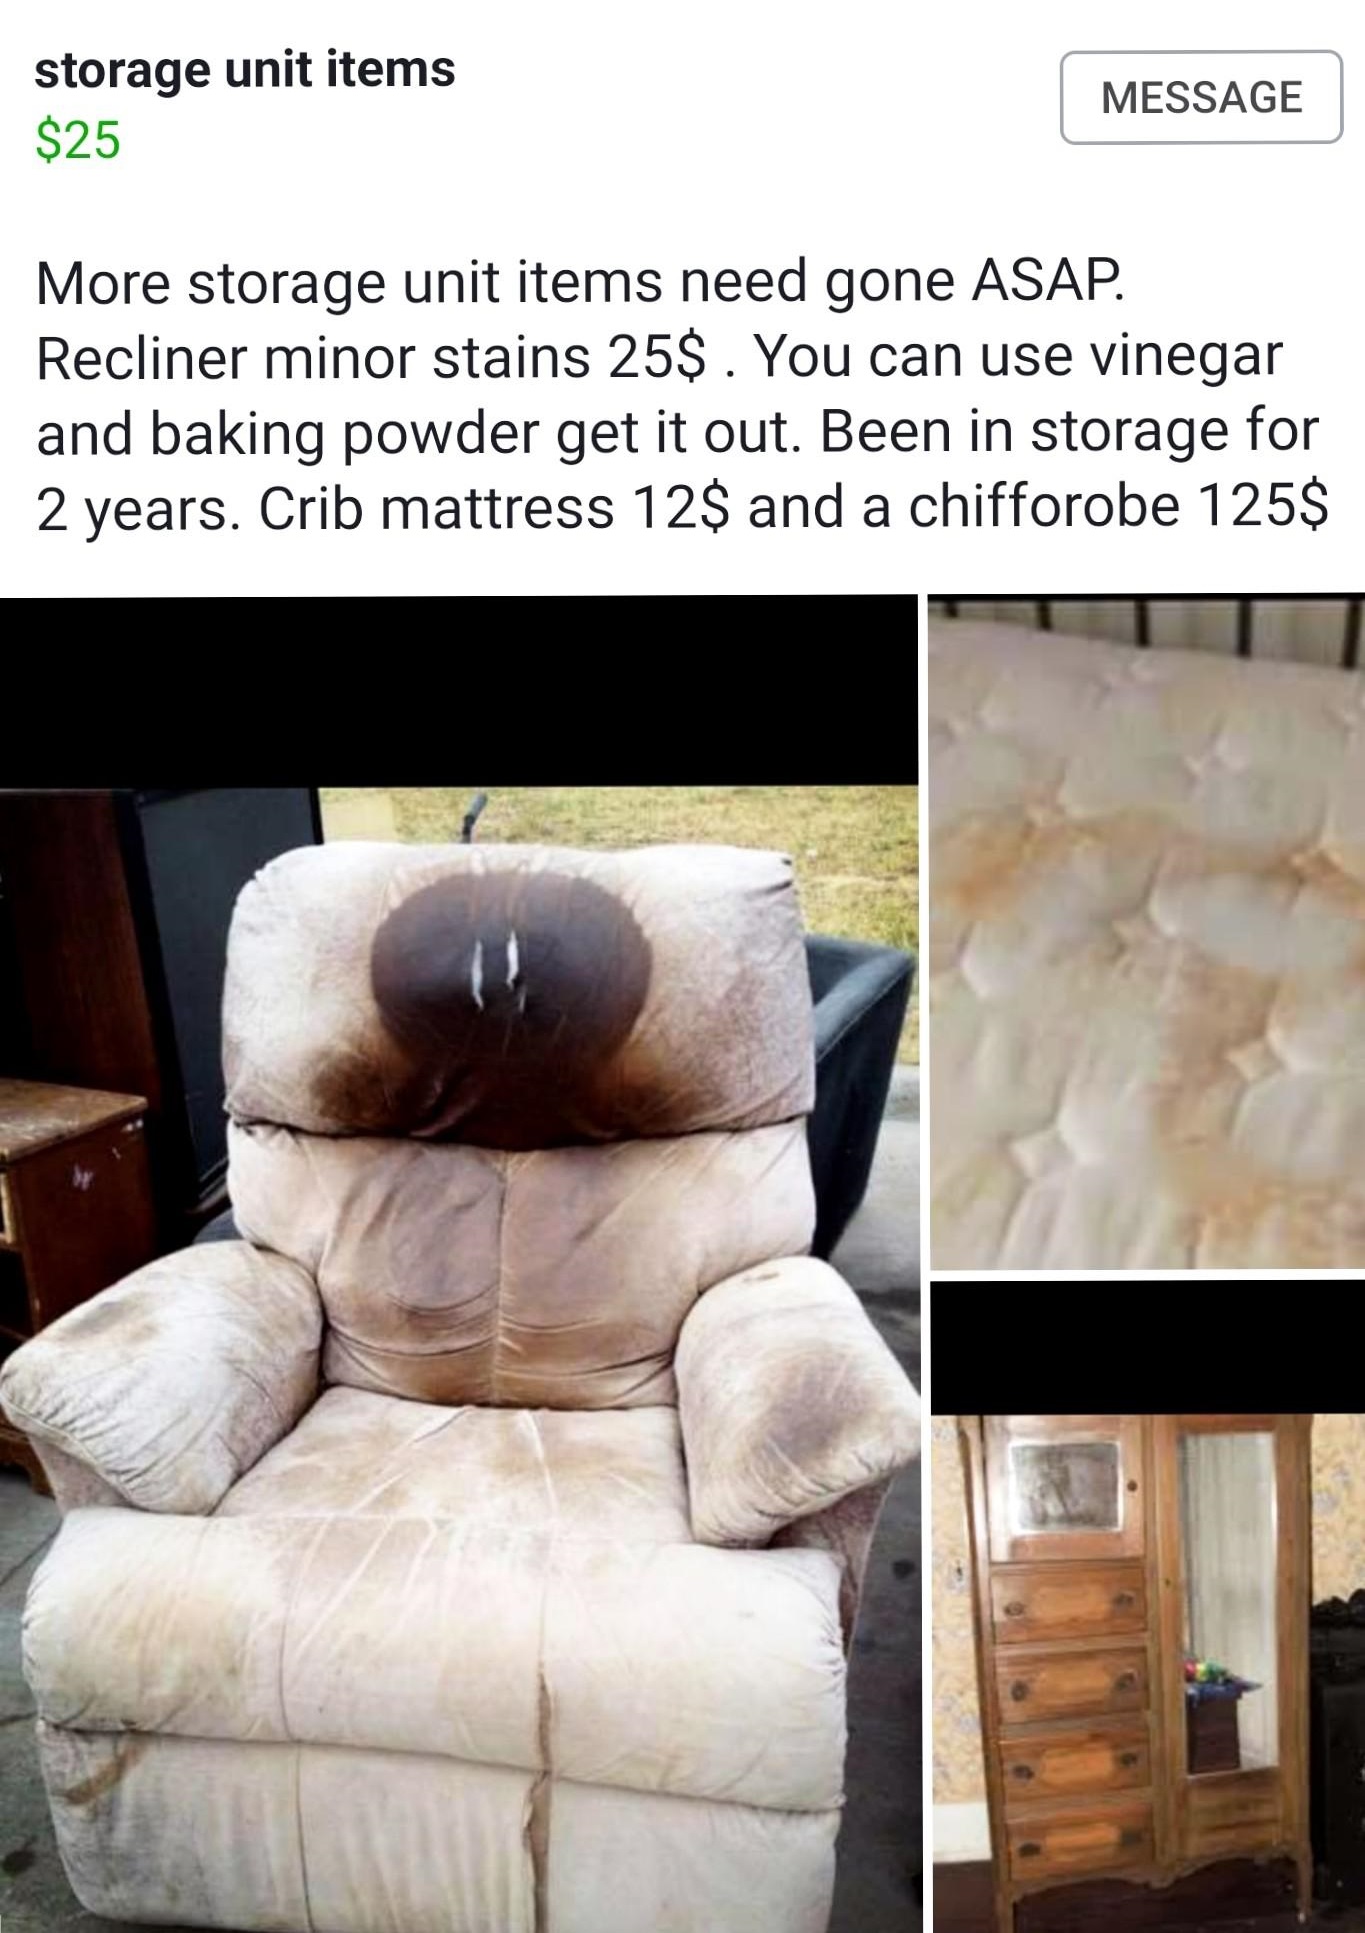 old lazy boy - storage unit items $25 Message More storage unit items need gone Asap. Recliner minor stains 25$. You can use vinegar and baking powder get it out. Been in storage for 2 years. Crib mattress 12$ and a chifforobe 125$